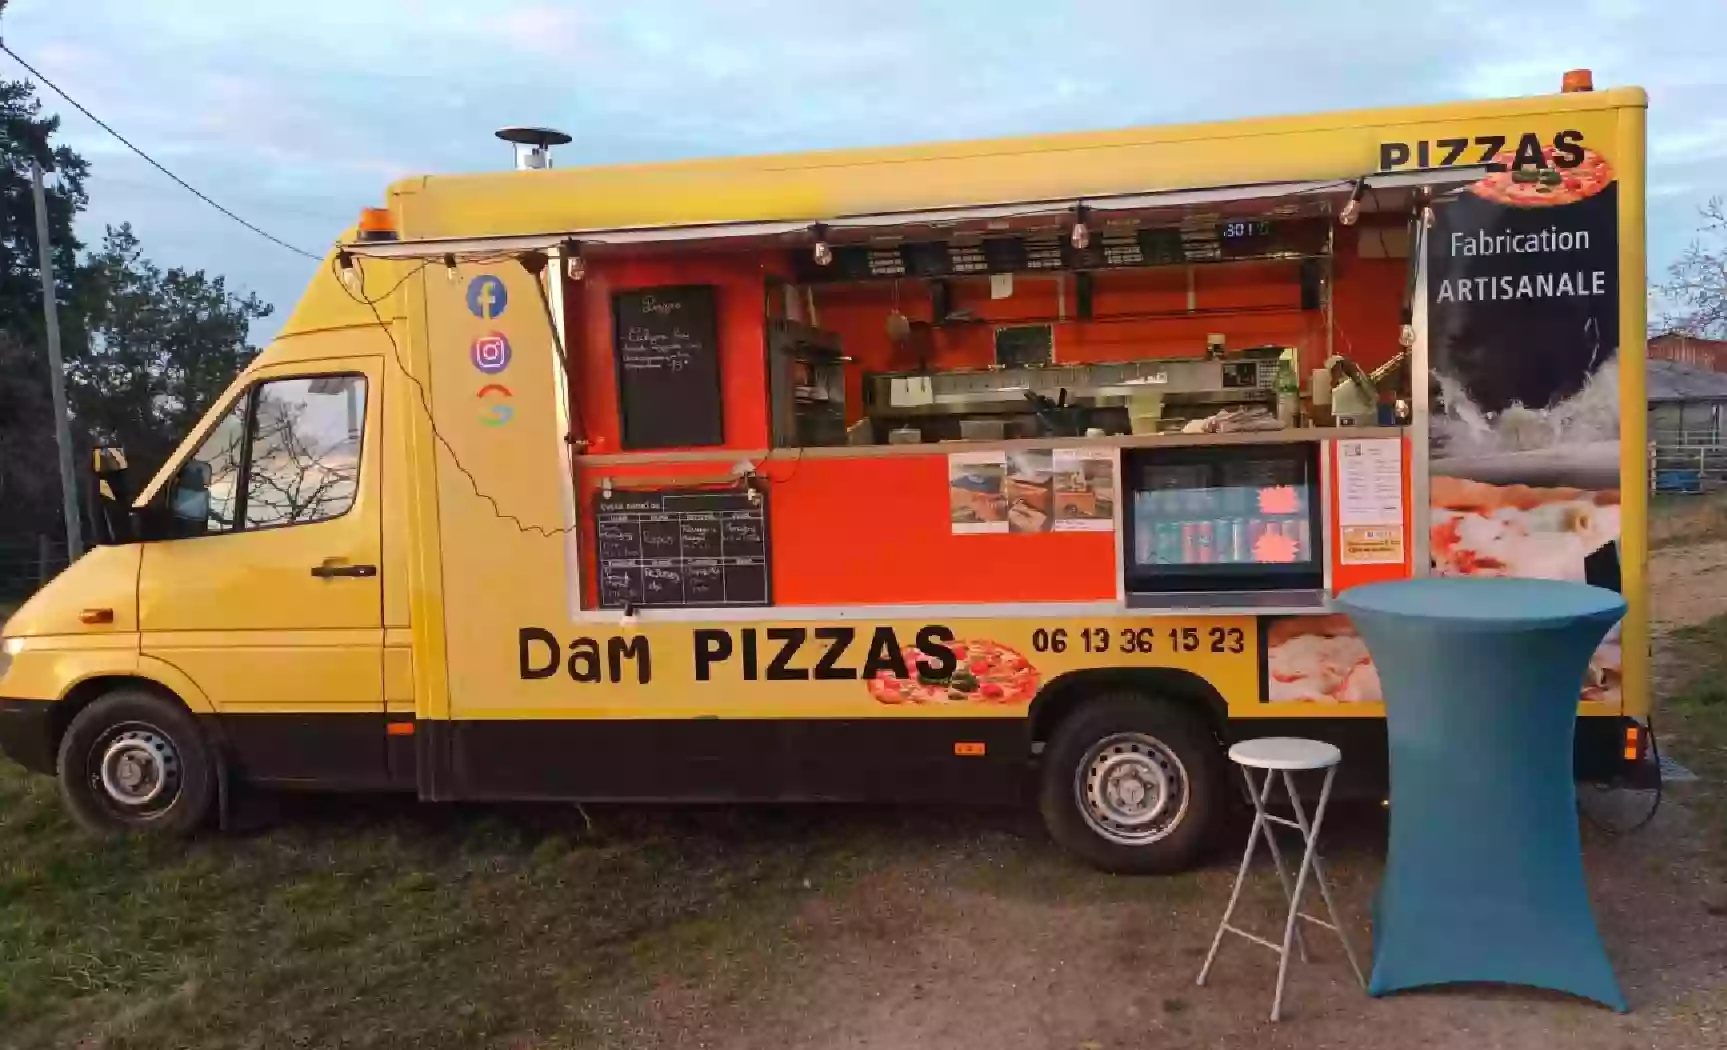 Pizza Marcigny - Dam services